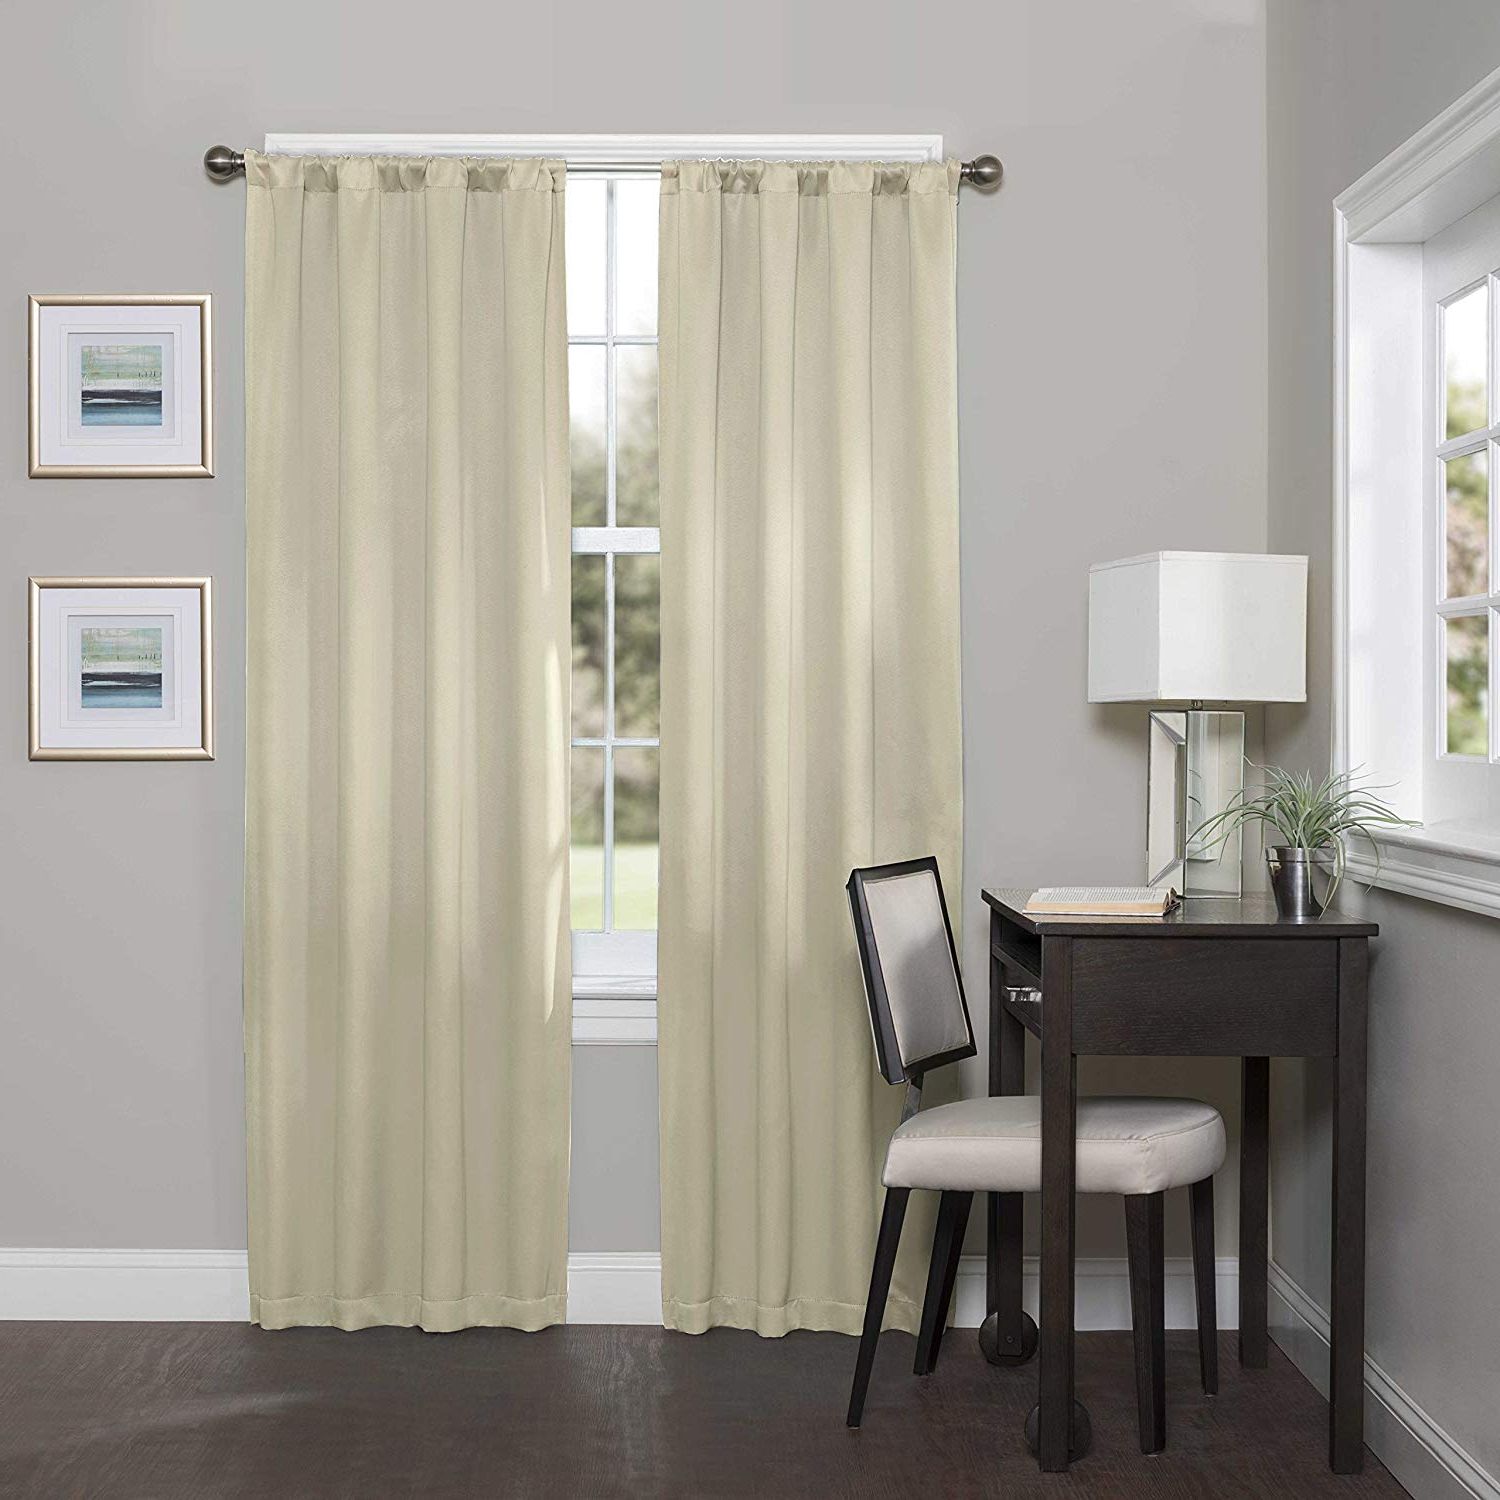 Eclipse Darrell Thermaweave Blackout Window Curtain Panels For Recent Eclipse Darrell Thermaweave Blackout Window Curtain Panel, 37" X 84",  Natural (View 2 of 20)